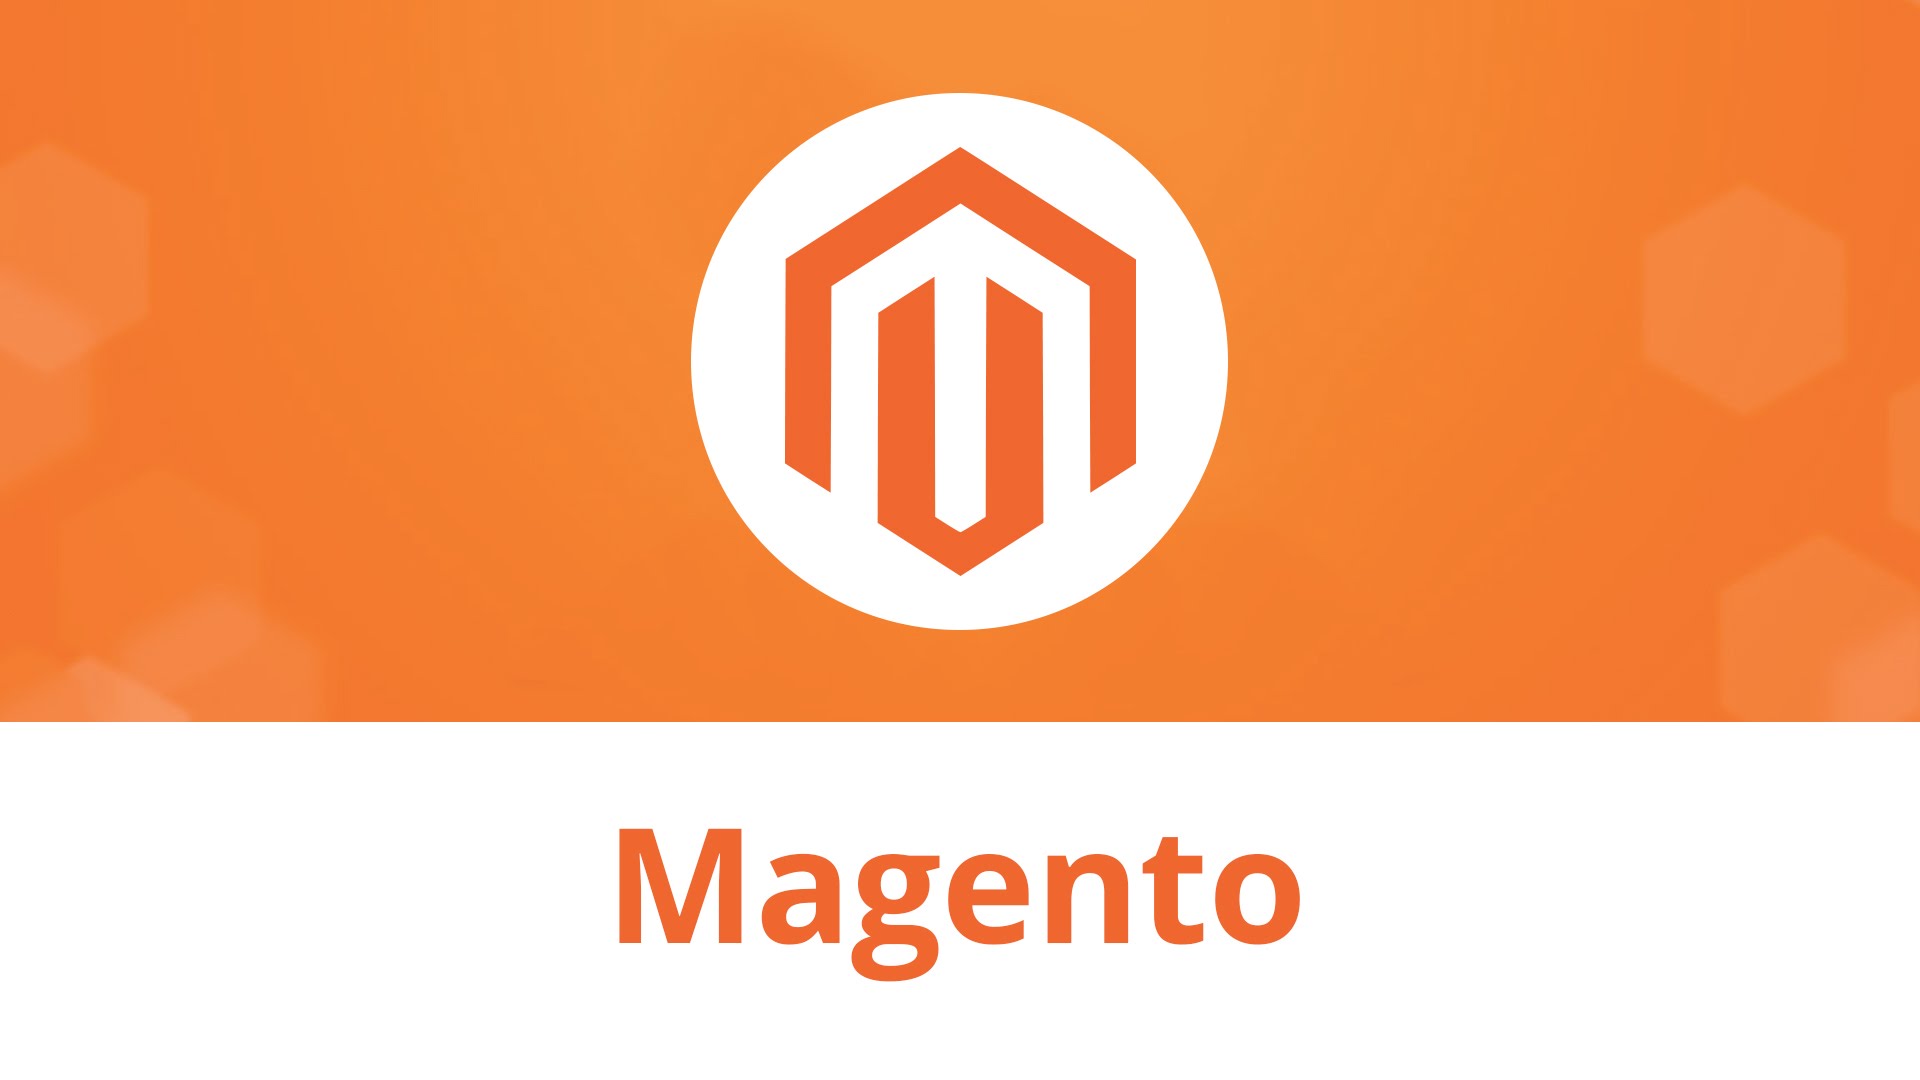 5 Most Common Magento Problems and Solutions